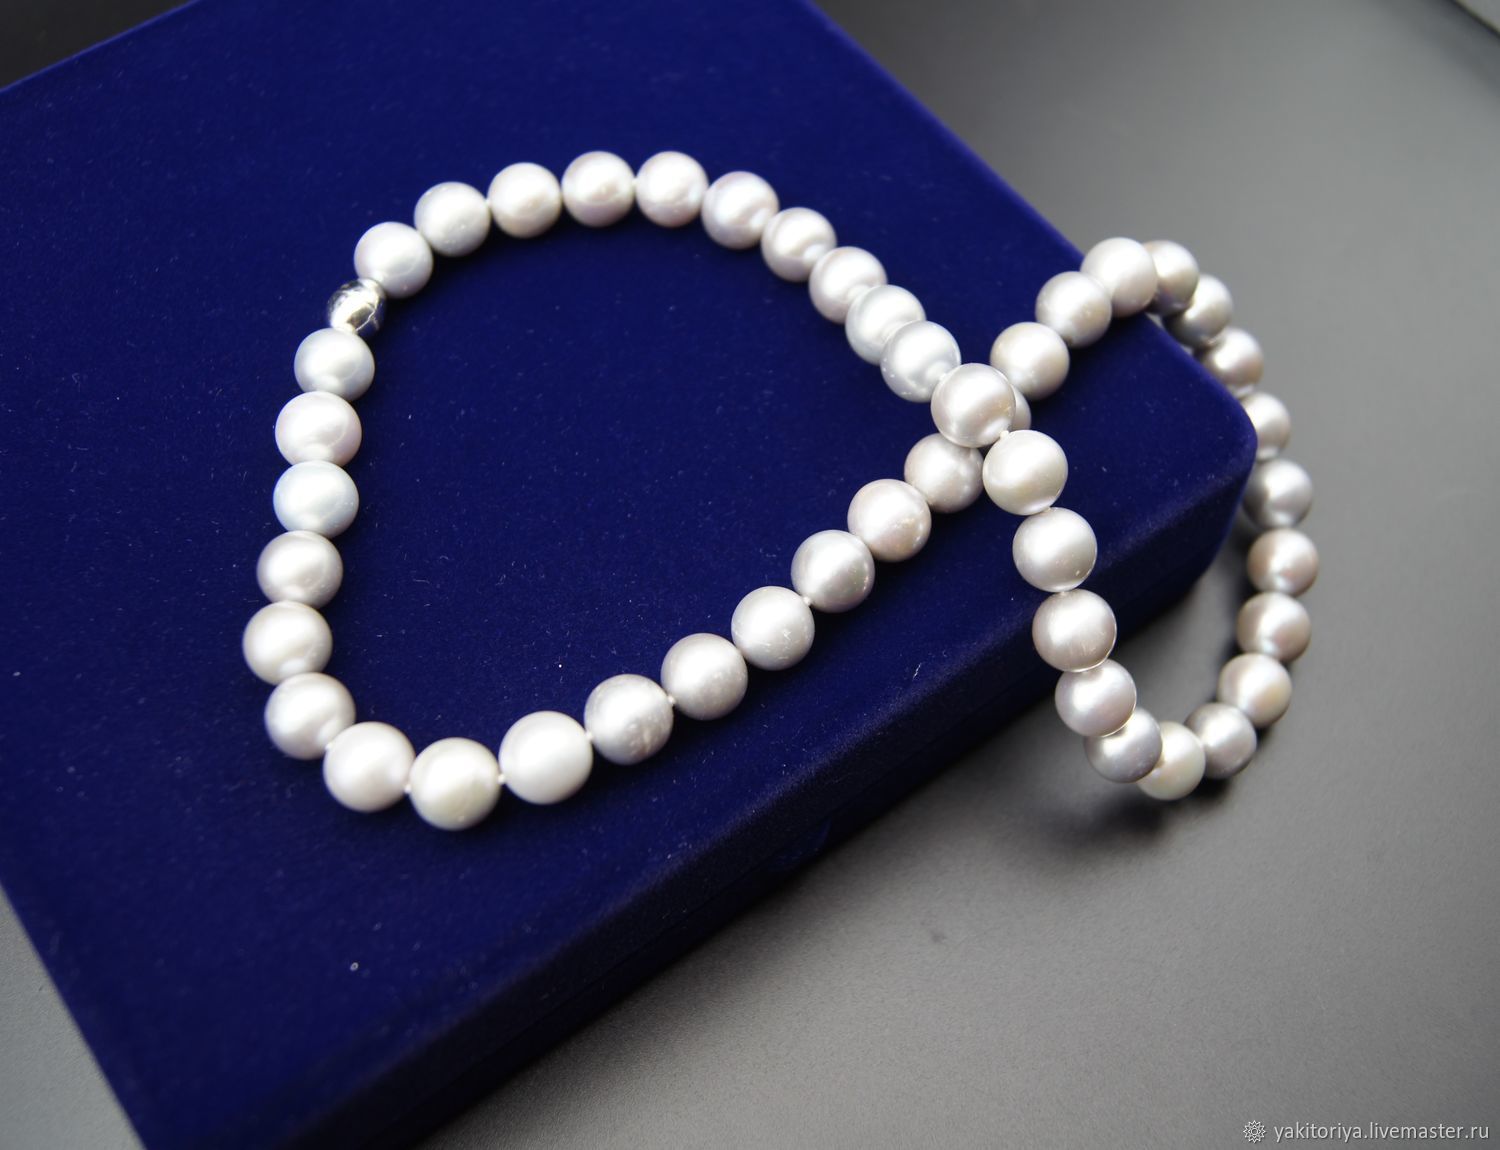 Necklace made of natural freshwater gray pearls 11-12 mm class AAA, Necklace, Moscow,  Фото №1